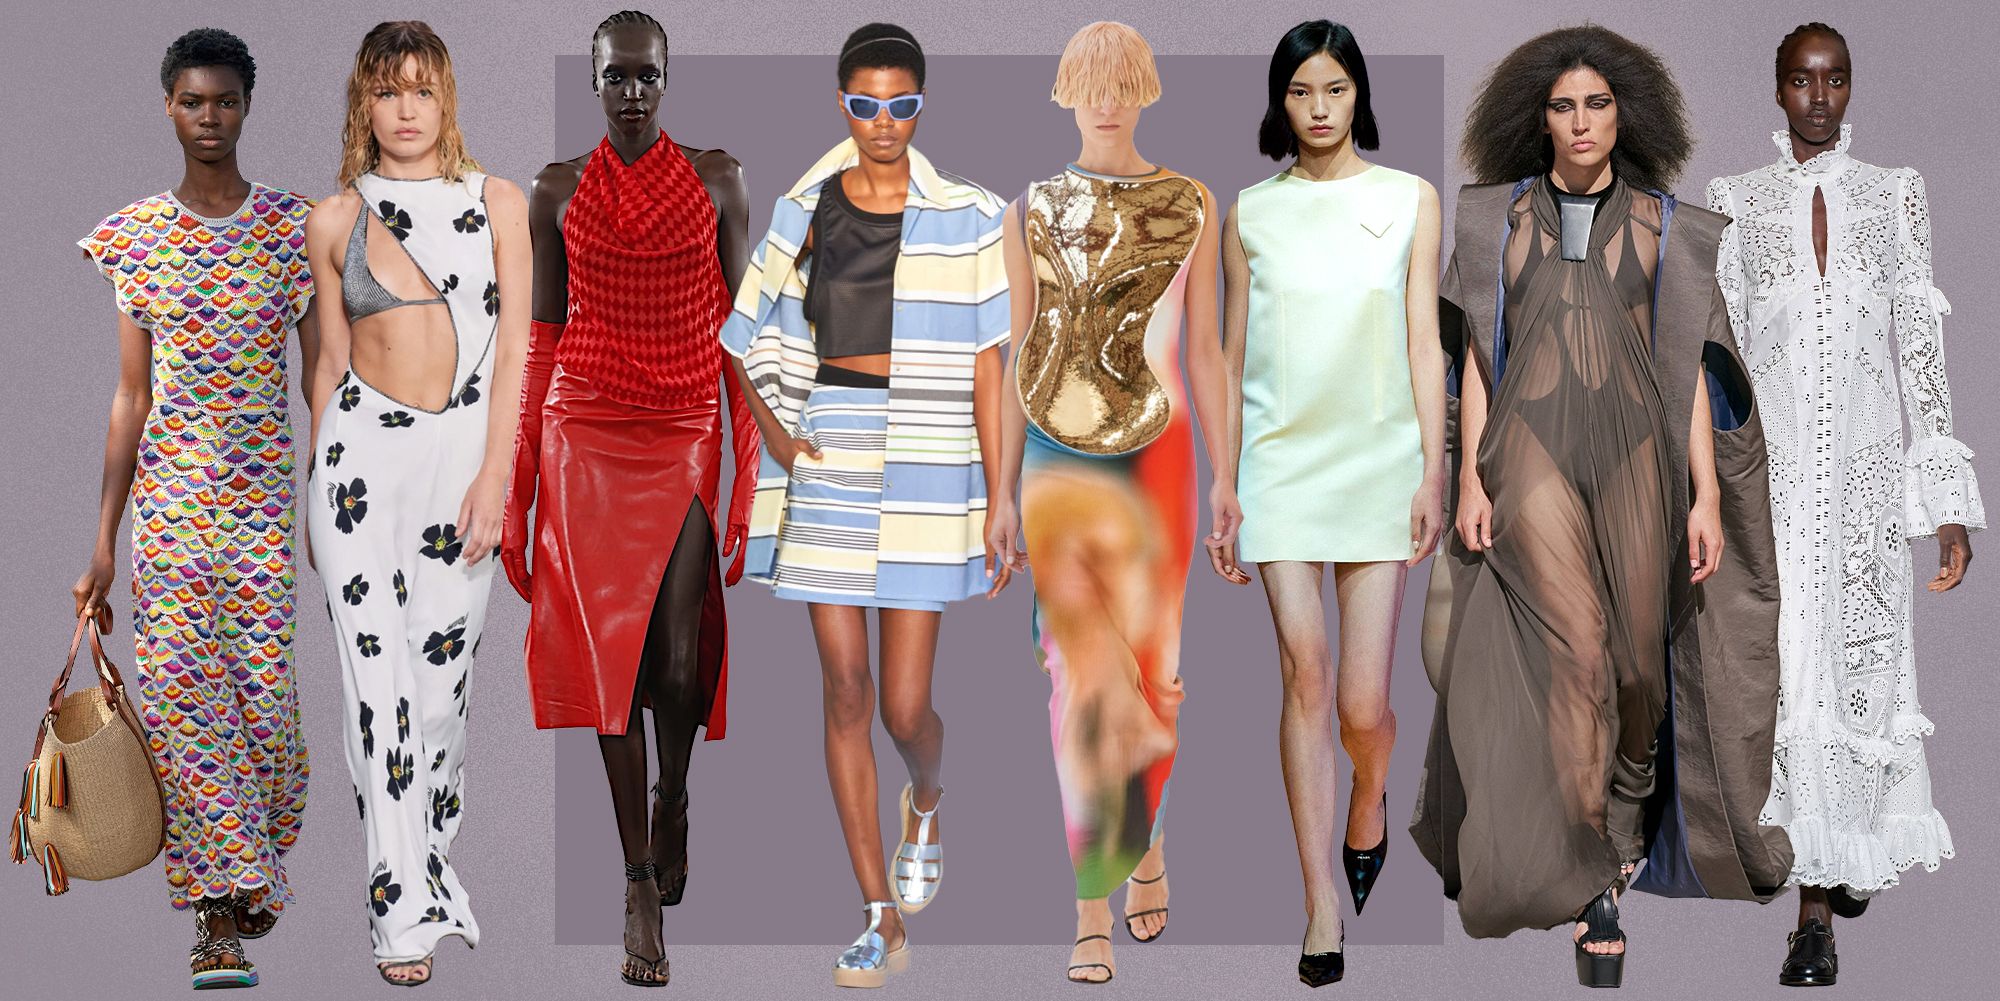 Spring fashion - Trends set to be big this year